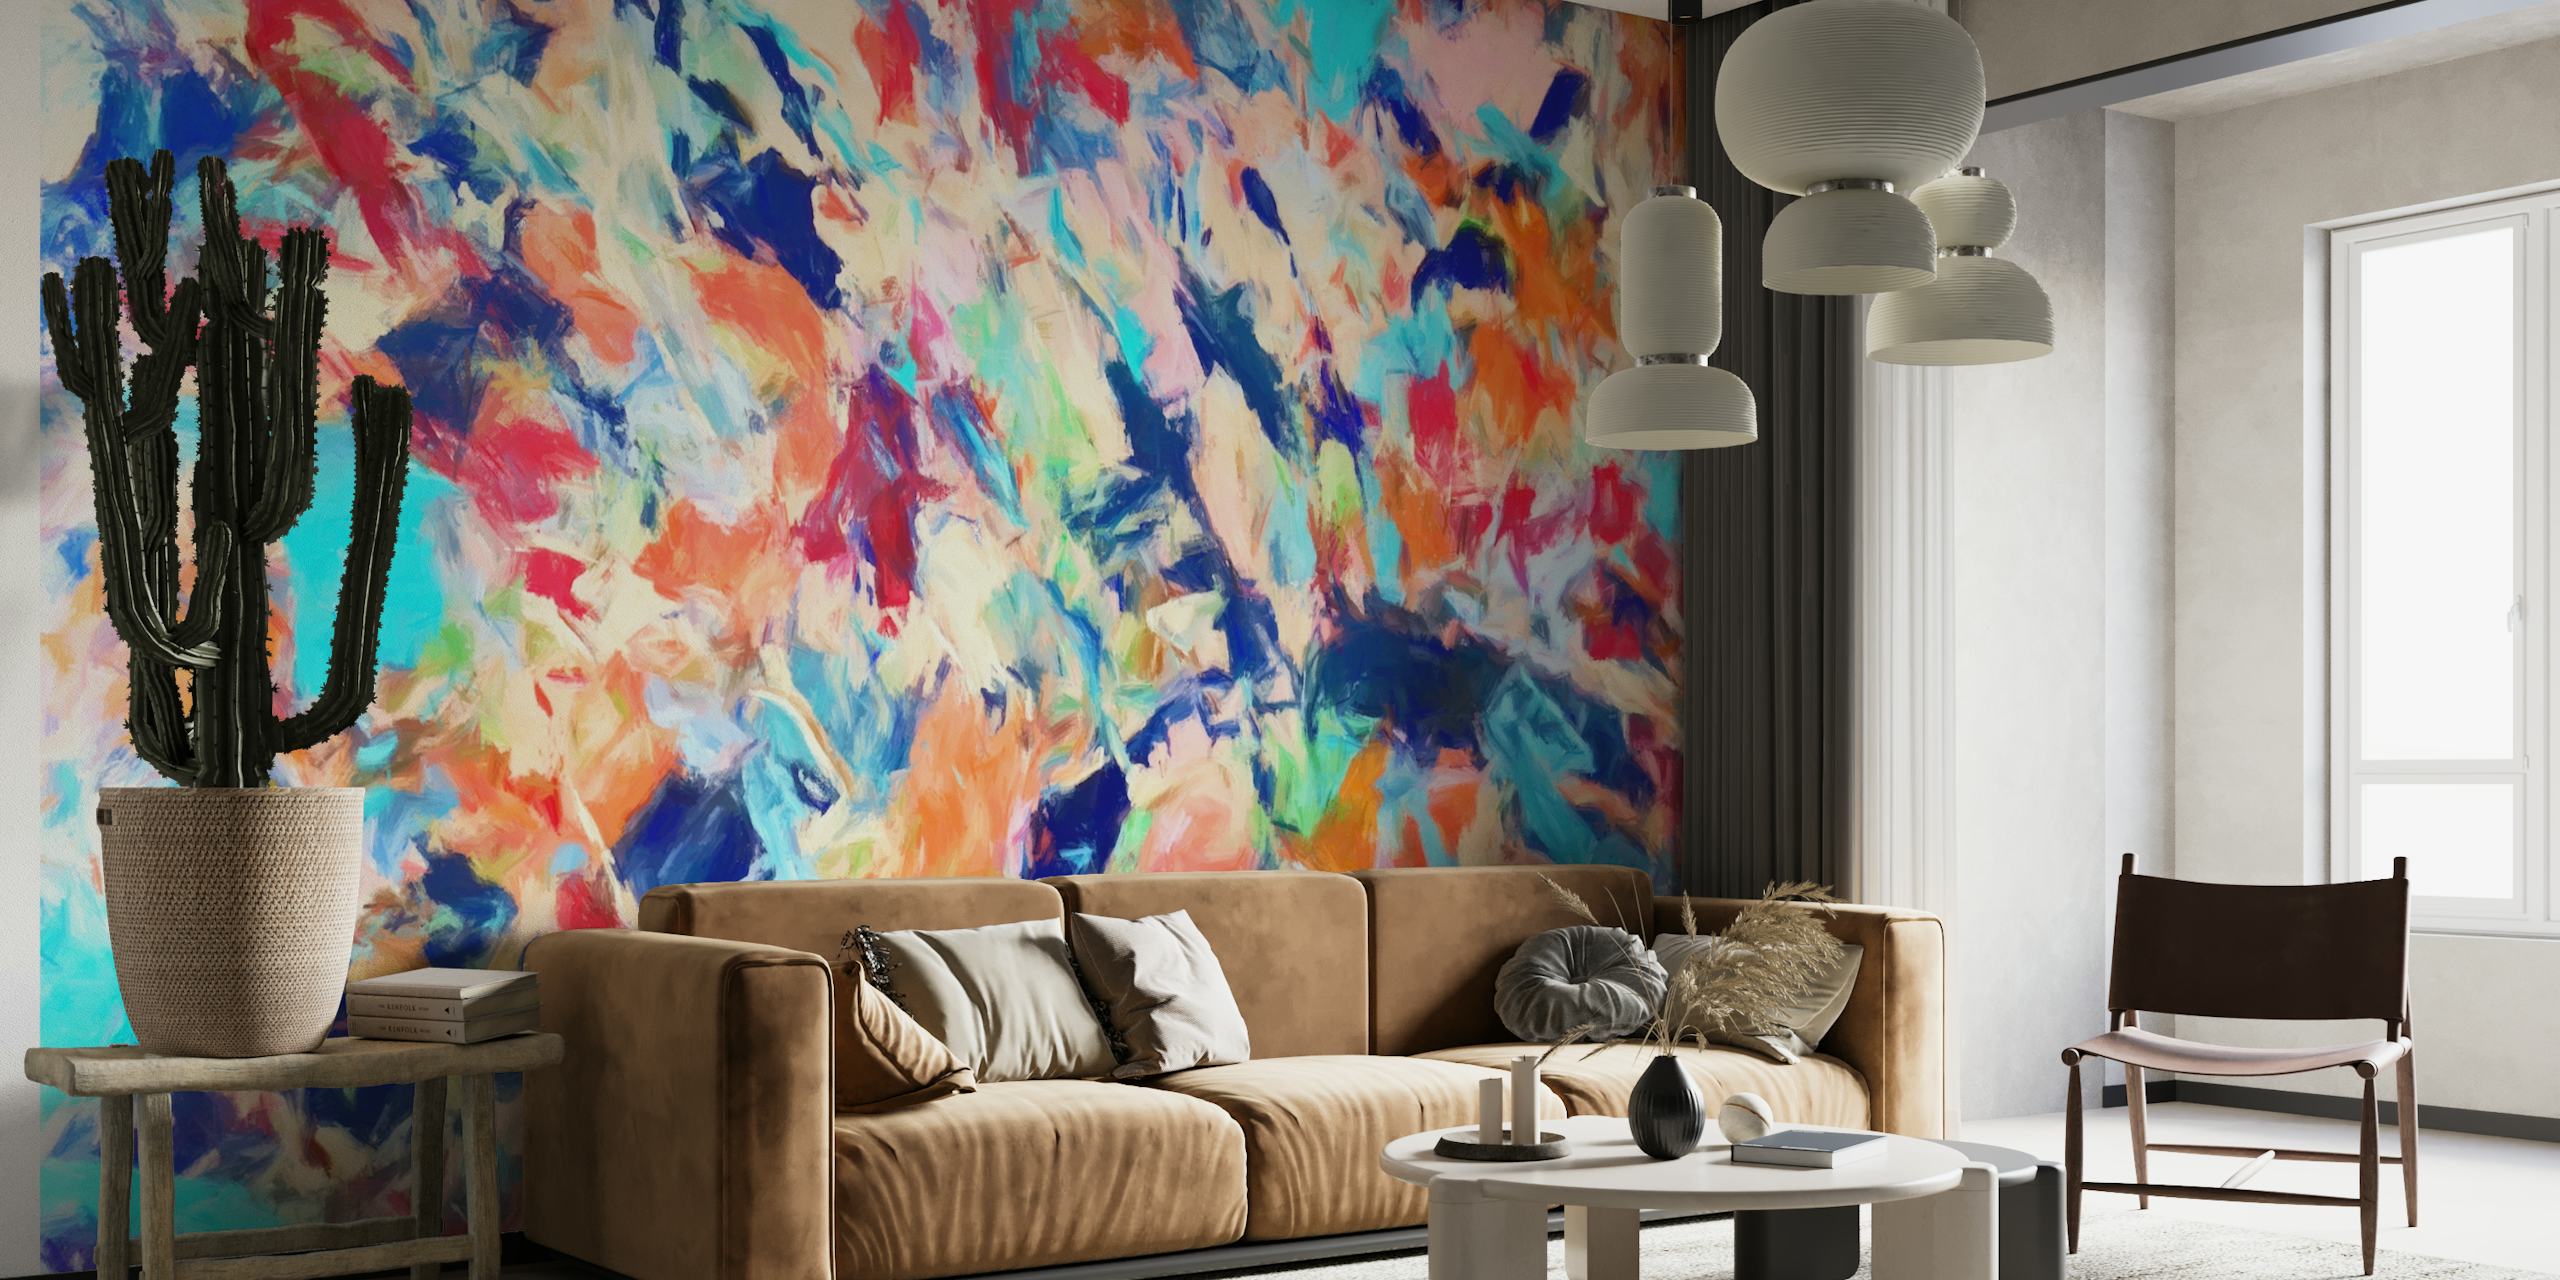 Colorful abstract wall mural 'Colored Brush Strokes 6' with dynamic blue, red, pink, and yellow patterns